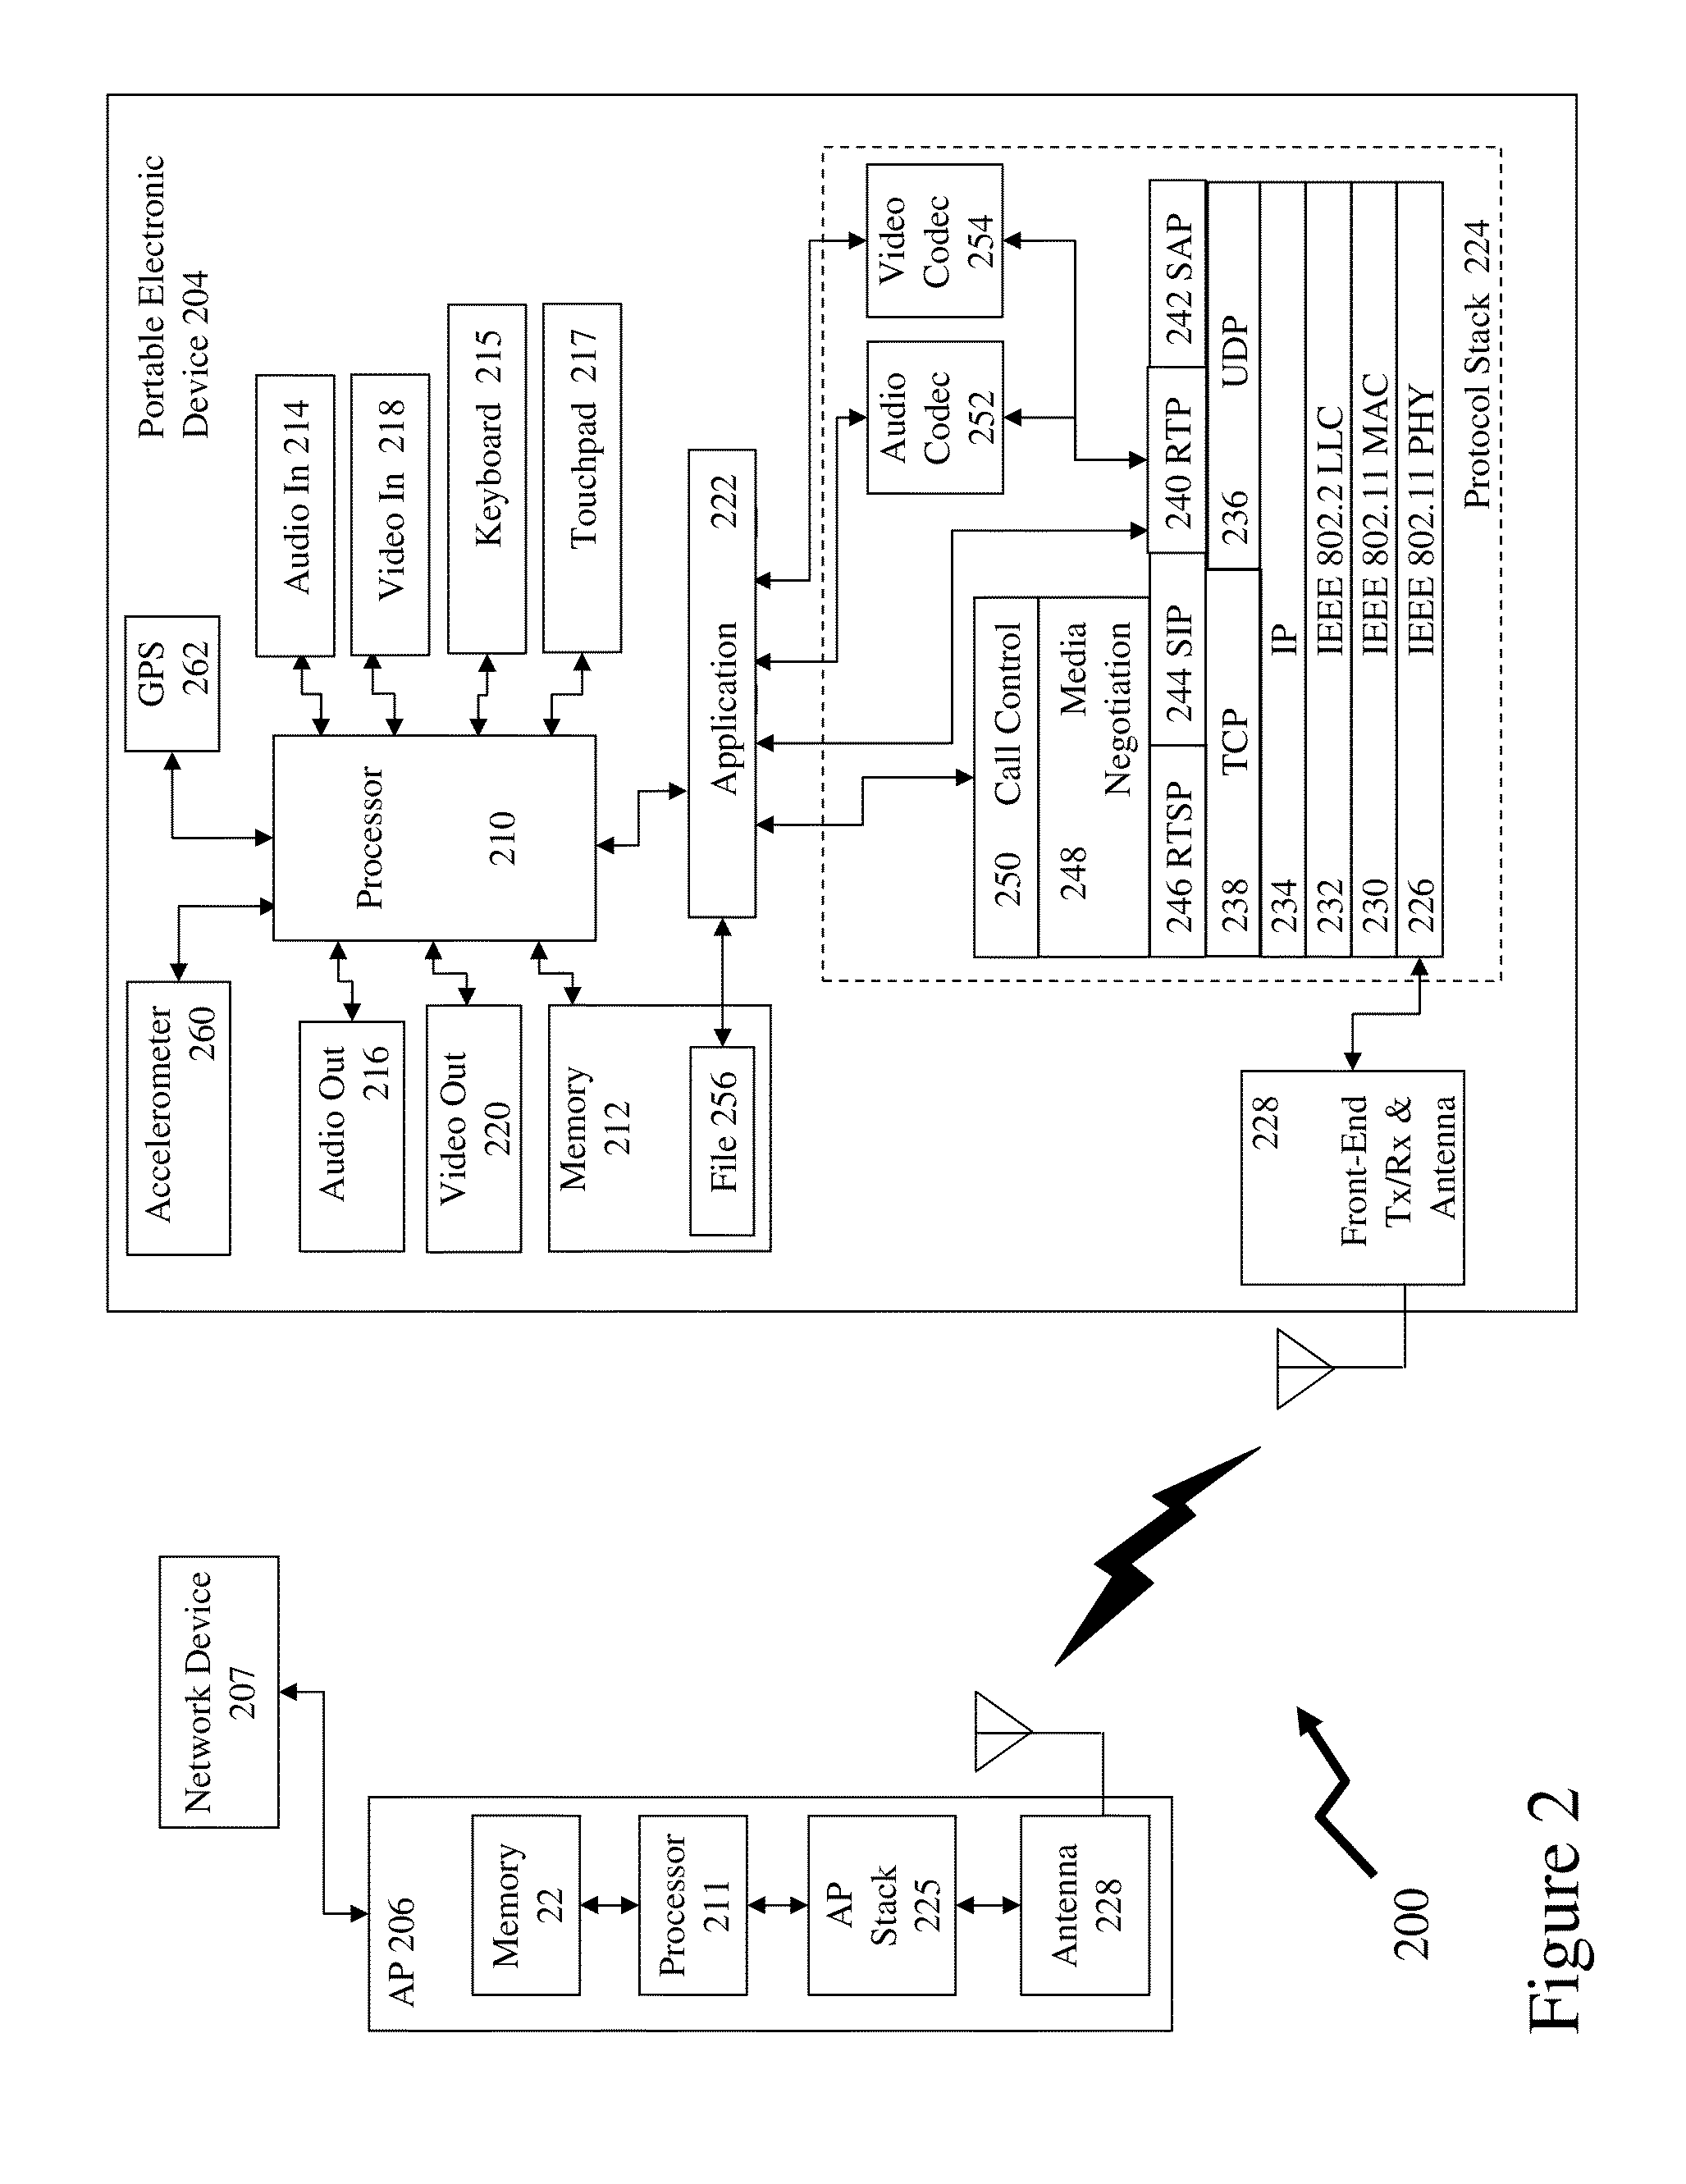 Methods and systems for delayed notifications in communications networks